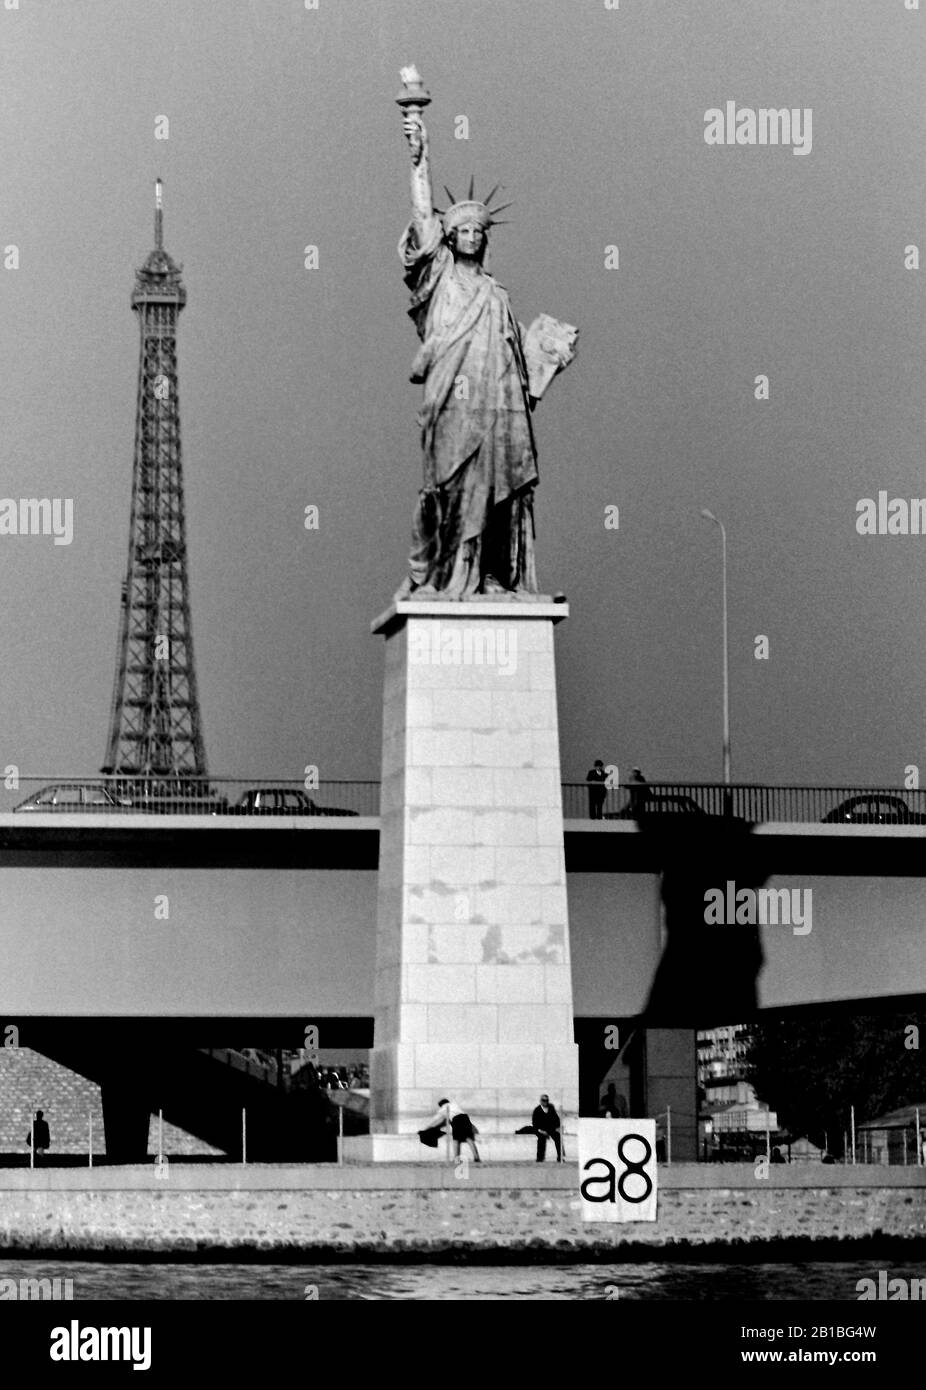 AJAXNETPHOTO. SEPTEMBER, 1971. PARIS, FRANCE. - REPLICA STATUE - OF LIBERTY IN THE MIDDLE OF THE RIVER SEINE AT PONT DE GRENELLE. NEO-CLASSICAL SCULPTURE OF ROBED ROMAN GODESS ON THE ILE AUX CYGNES - ISLAND OF SWANS - SEEN FROM THE RIVER. THE LANDMARK EIFFEL TOWER CAN BE SEEN IN BACKGROUND. PHOTO:JONATHAN EASTLAND REF: RX7 151204 190 Stock Photo